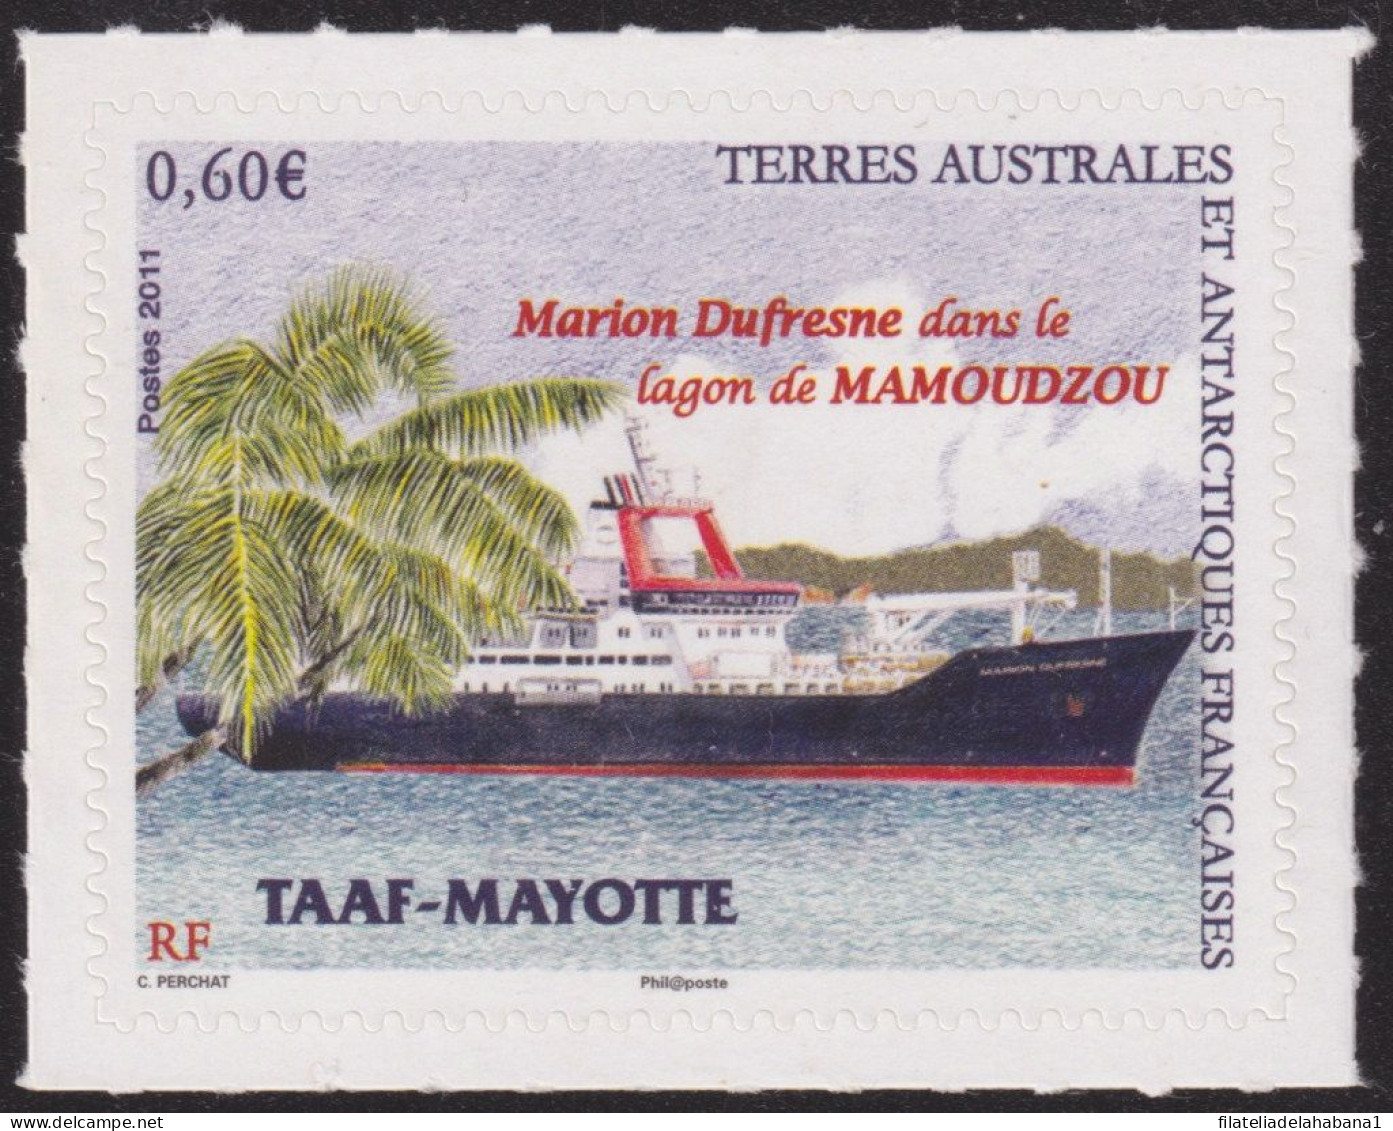 F-EX50302 TAAF MAYOTTE ANTARCTIC MNH 2011 MARION DUFRESNE SHIP ADHESIVE - Bateaux